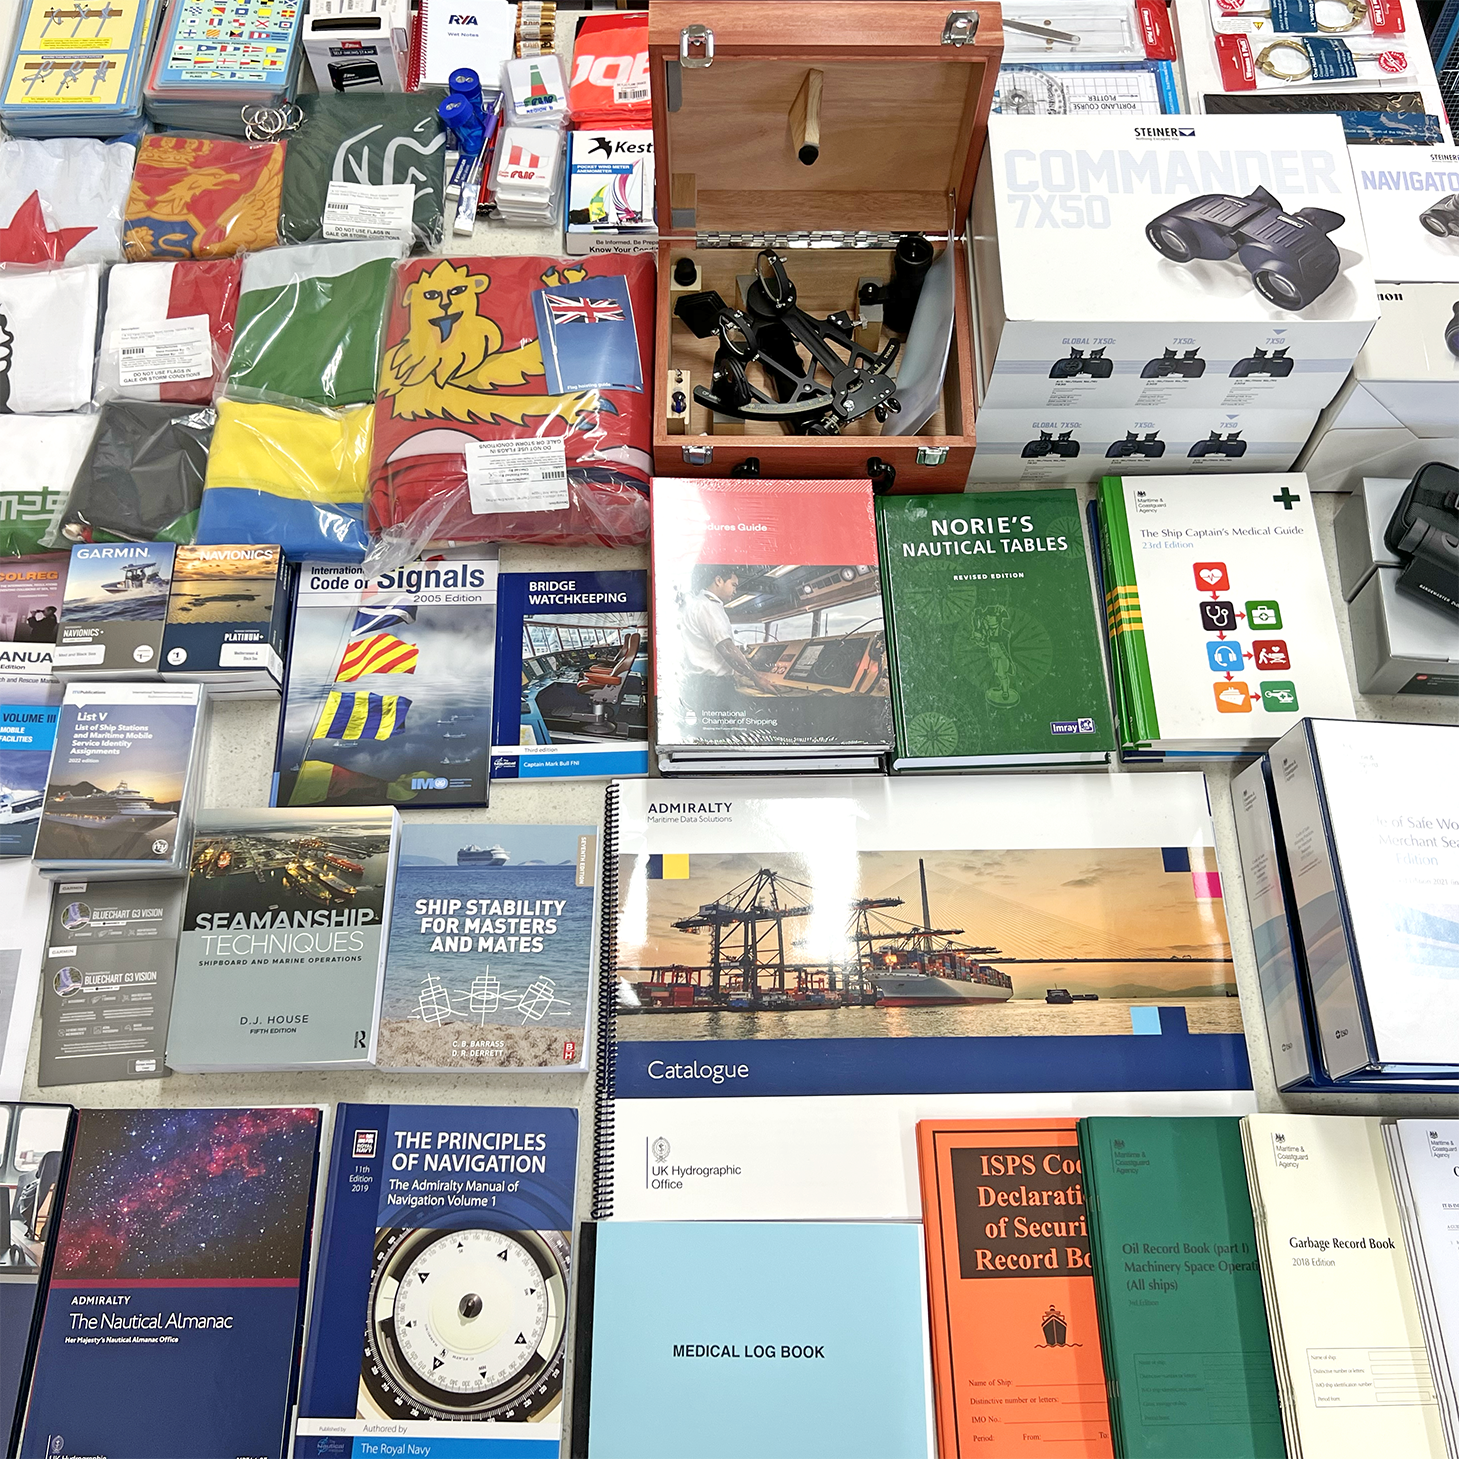 A table full of publications and navigation equipment for superyachts